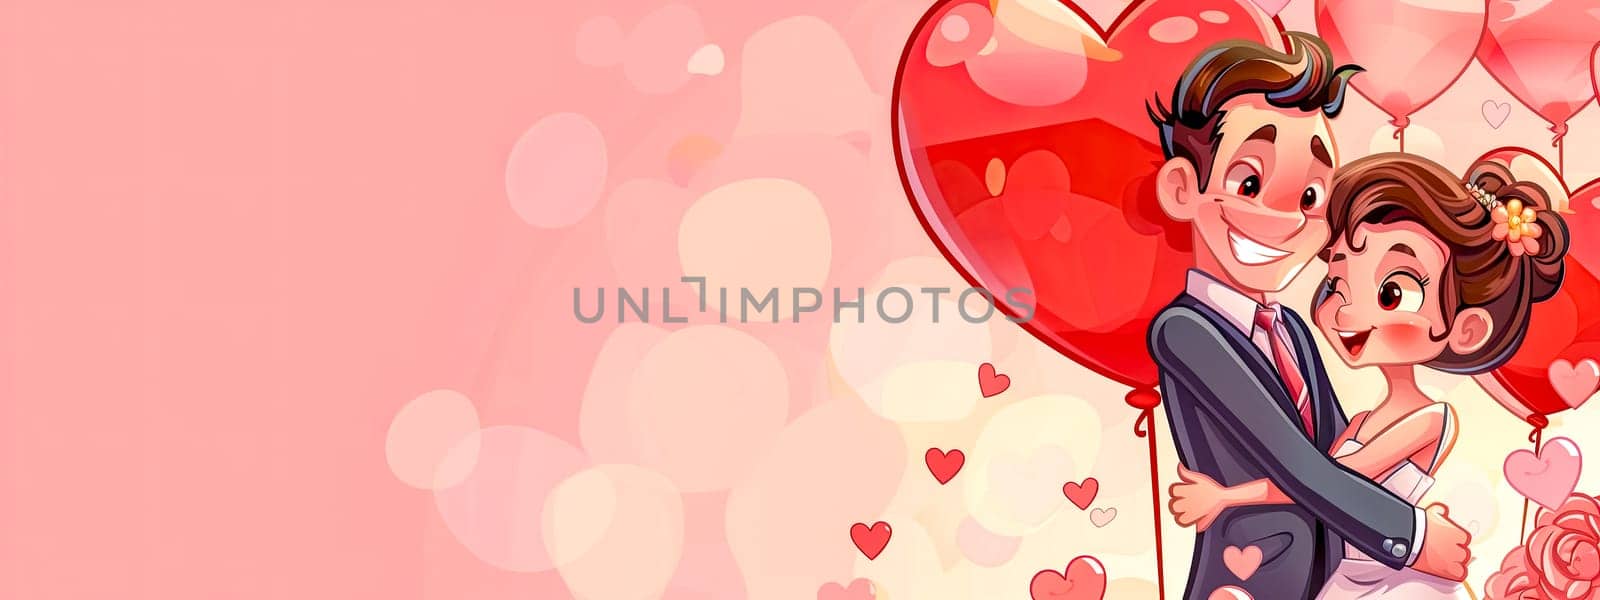 Loving Couple Embrace with Heart Balloons on Pink Background by Edophoto